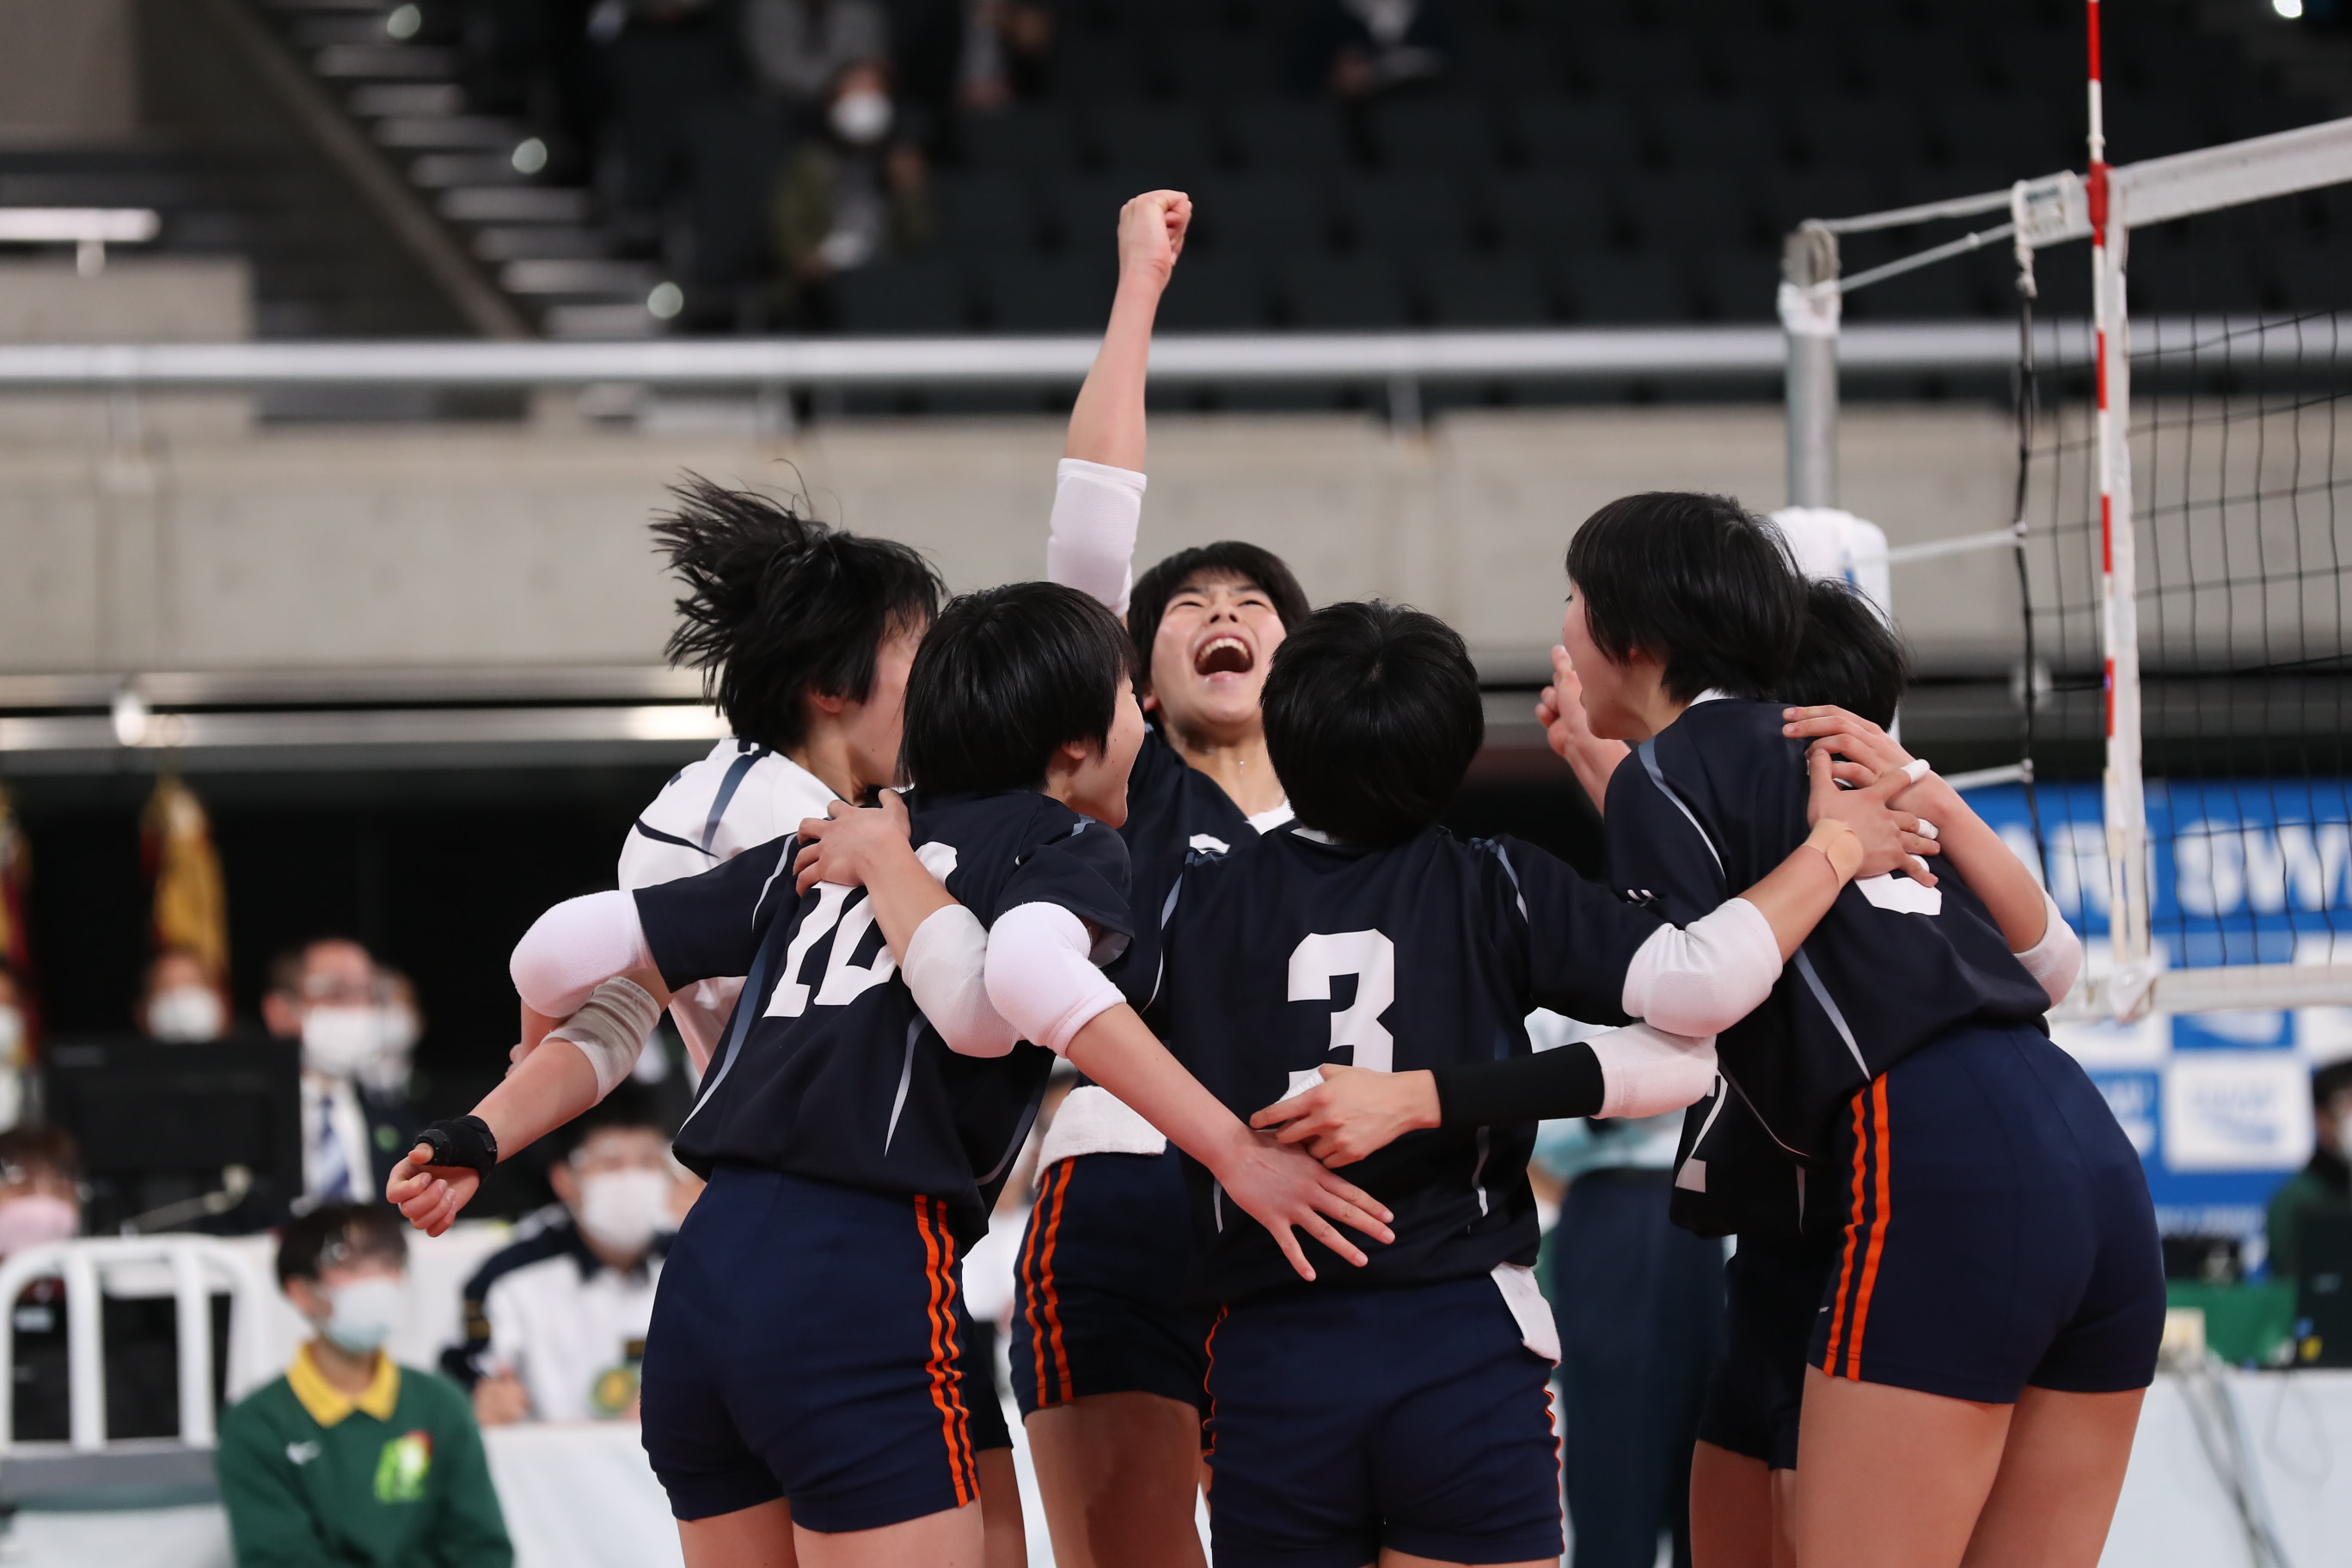 Watch the All Japan High School Championship Finals on Volleyball TV volleyballworld